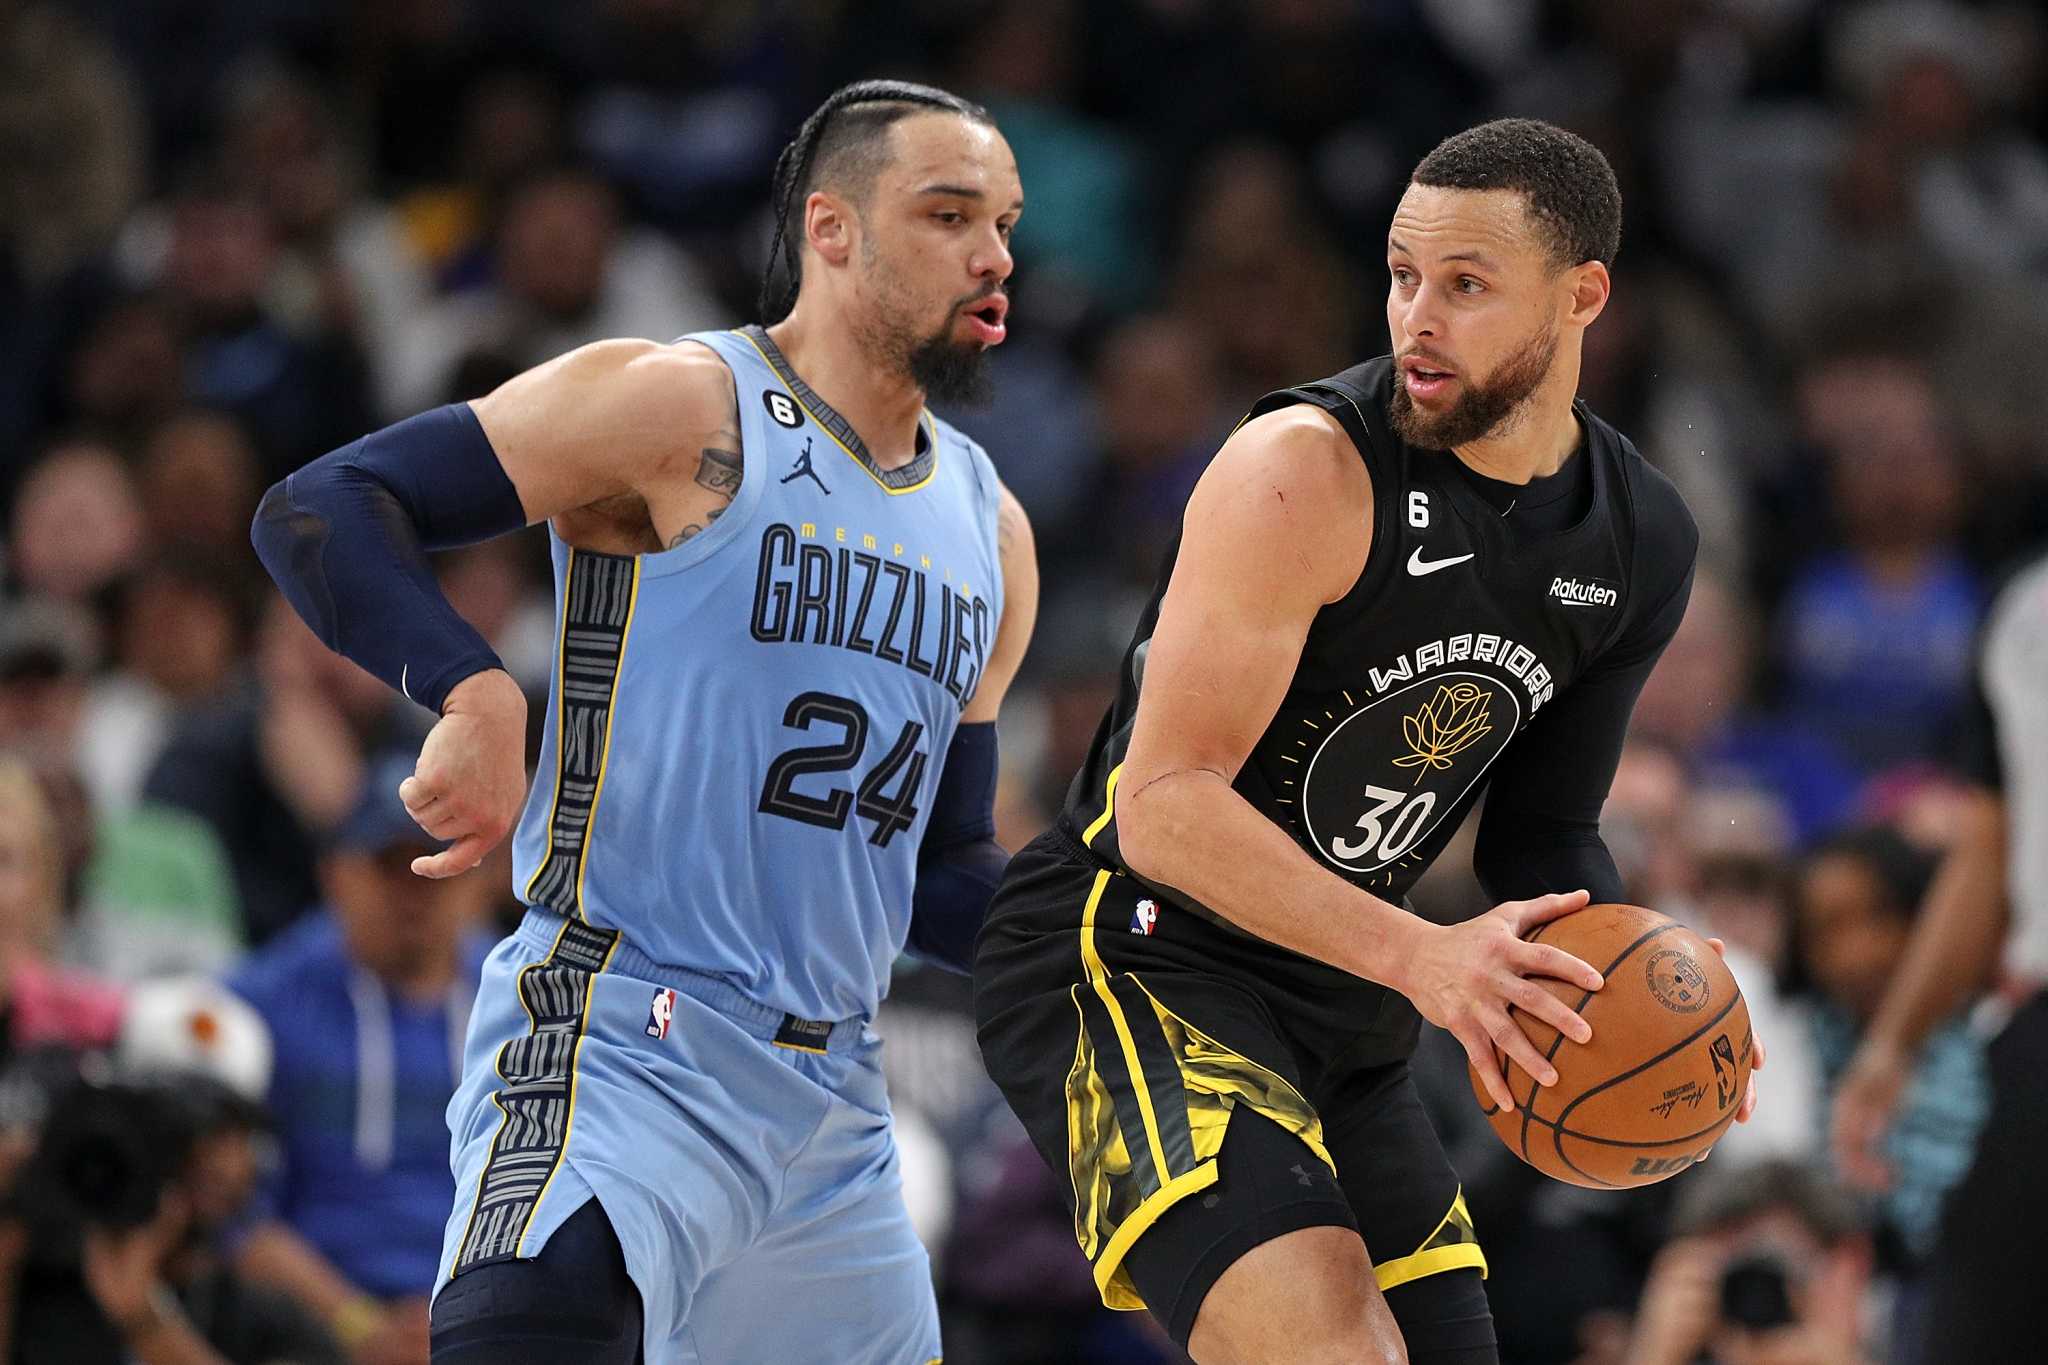 Luke Kennard over Dillon Brooks? Grizzlies may have found an